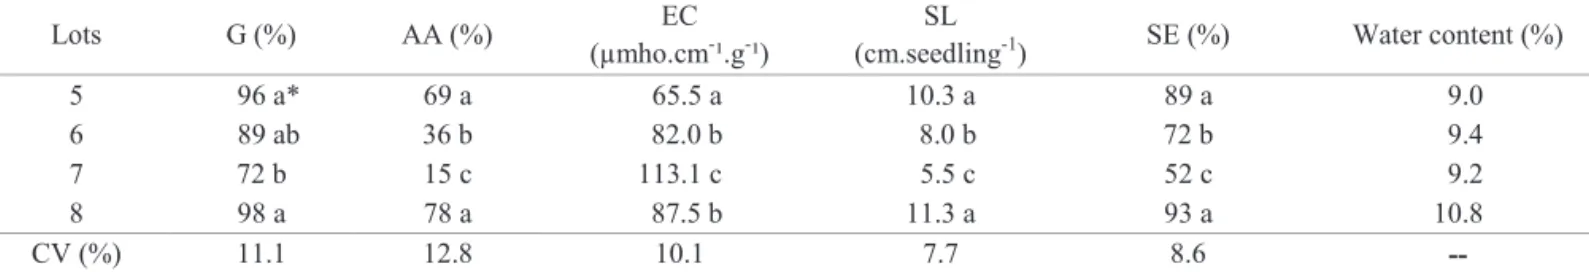 Table 5. Germination (G), accelerated aging (AA), electrical conductivity (EC), seedling length (SL), seedling emergence (SE)  and water content of four lots of ‘Itapuã 600’ pea seeds, at the beginning of storage.